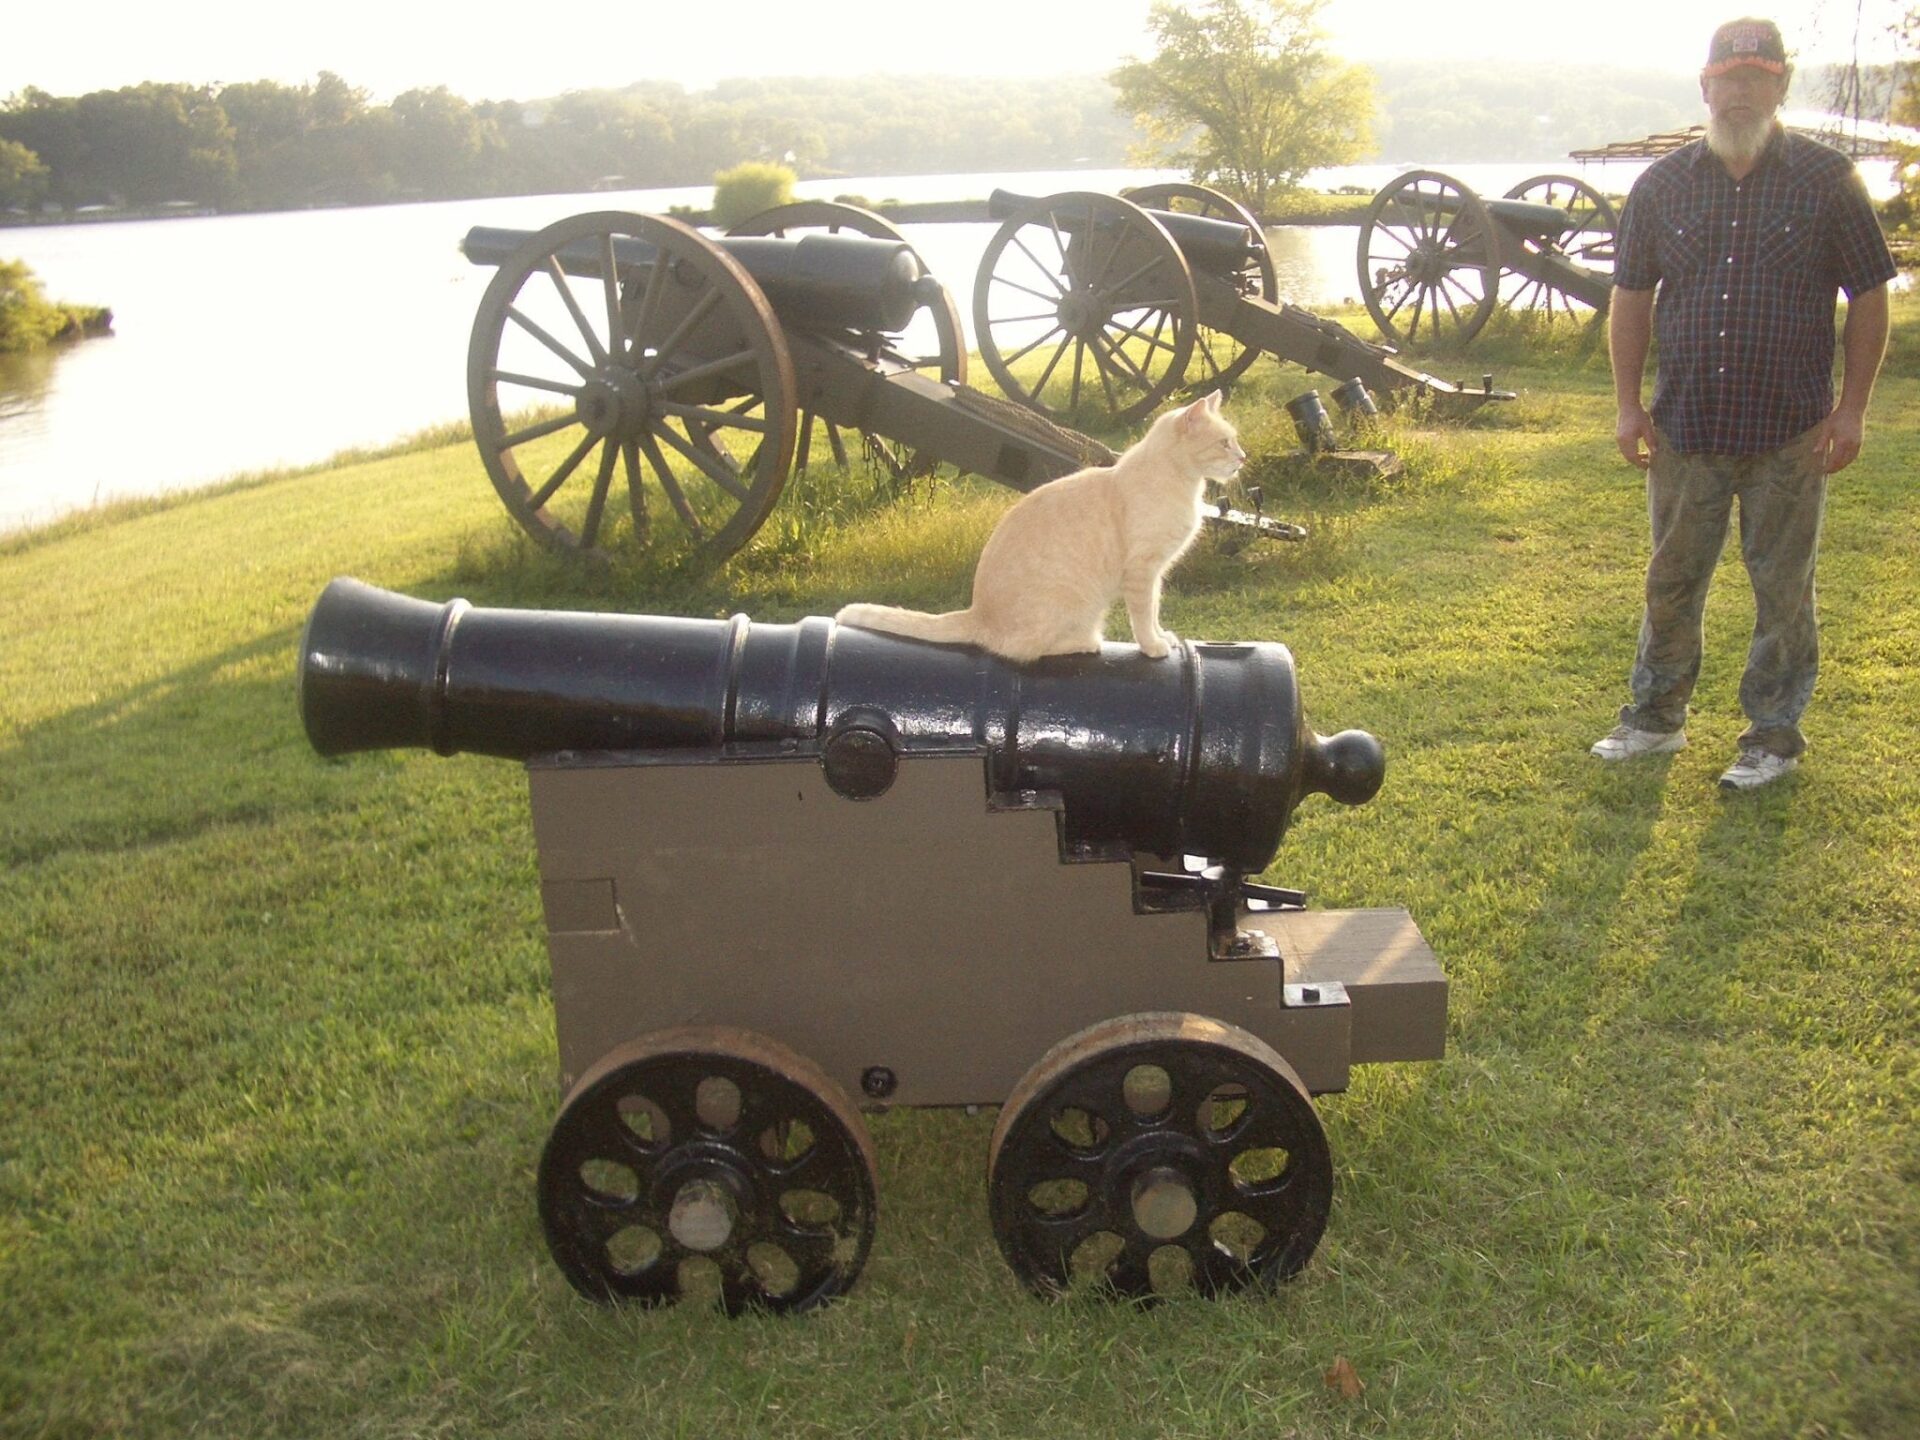 Gribeauval 9 Pounder Cannon 1765 года.jpg